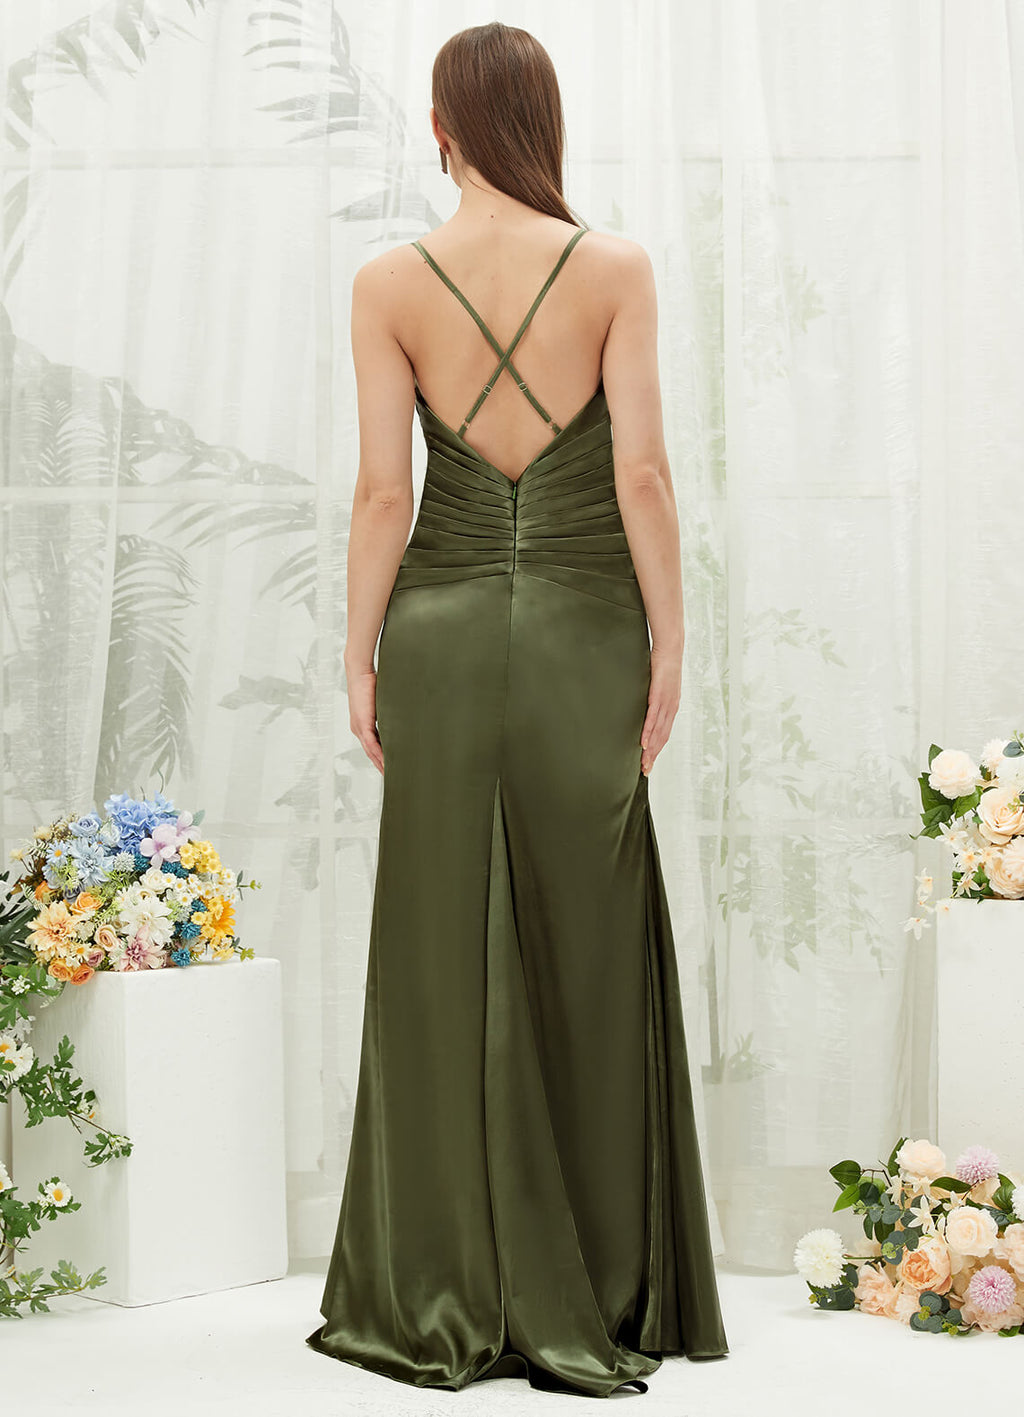 Satin Cowl Neckline Adjustable Sexy Backless Cross Straps Bridesmaid Dress Rory